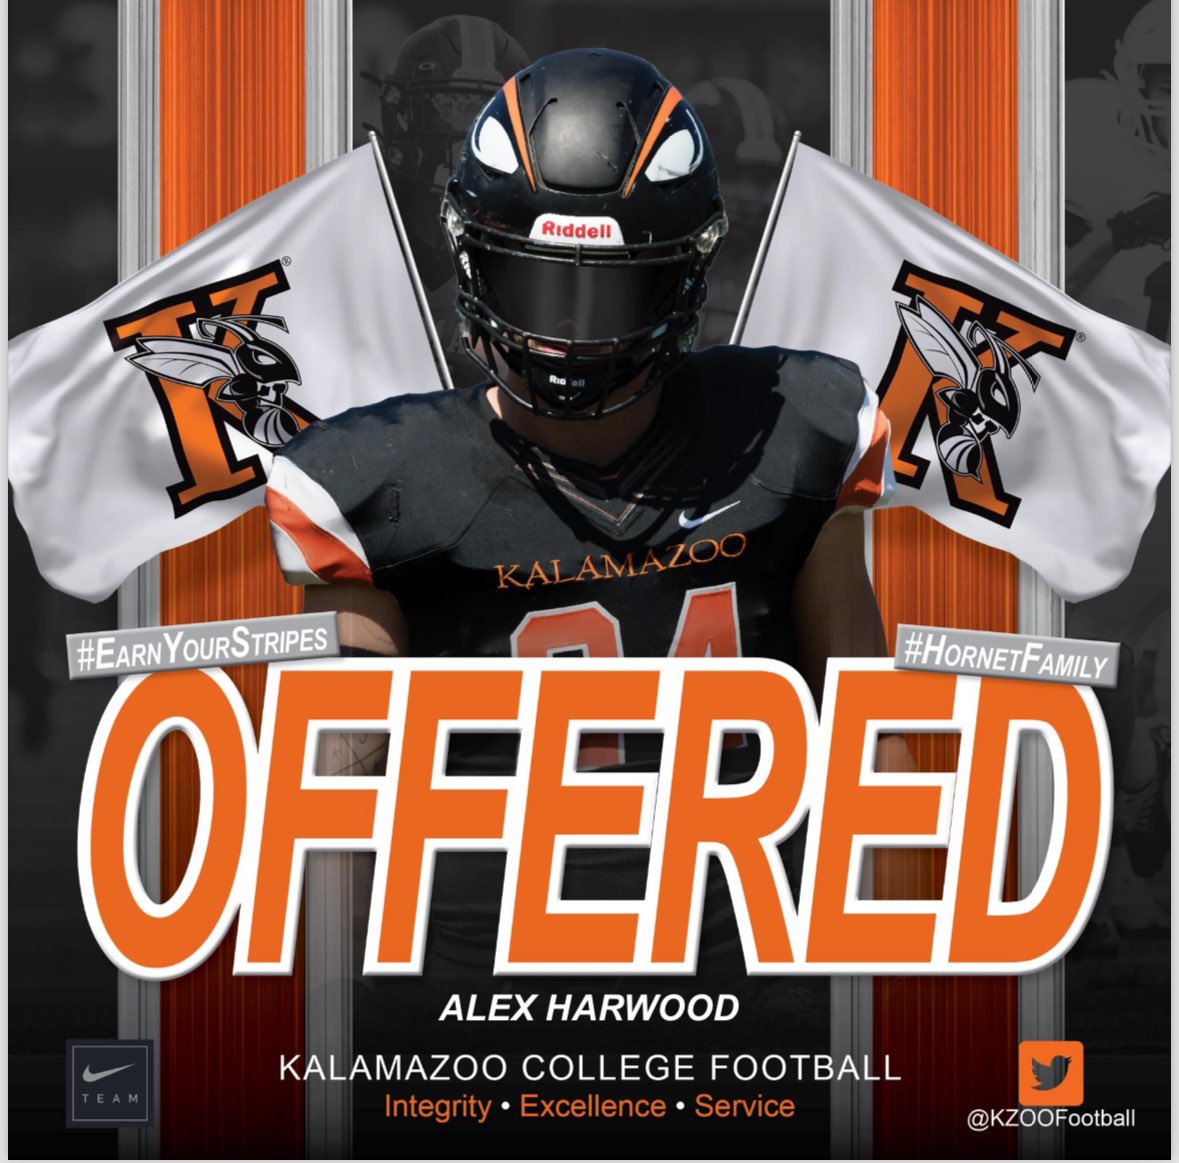 After a great conversation with @CoachZorboKZOO I am truly blessed to receive an offer from @KzooFootball 
#AGTG #EarnYourStripes #HornetFamily